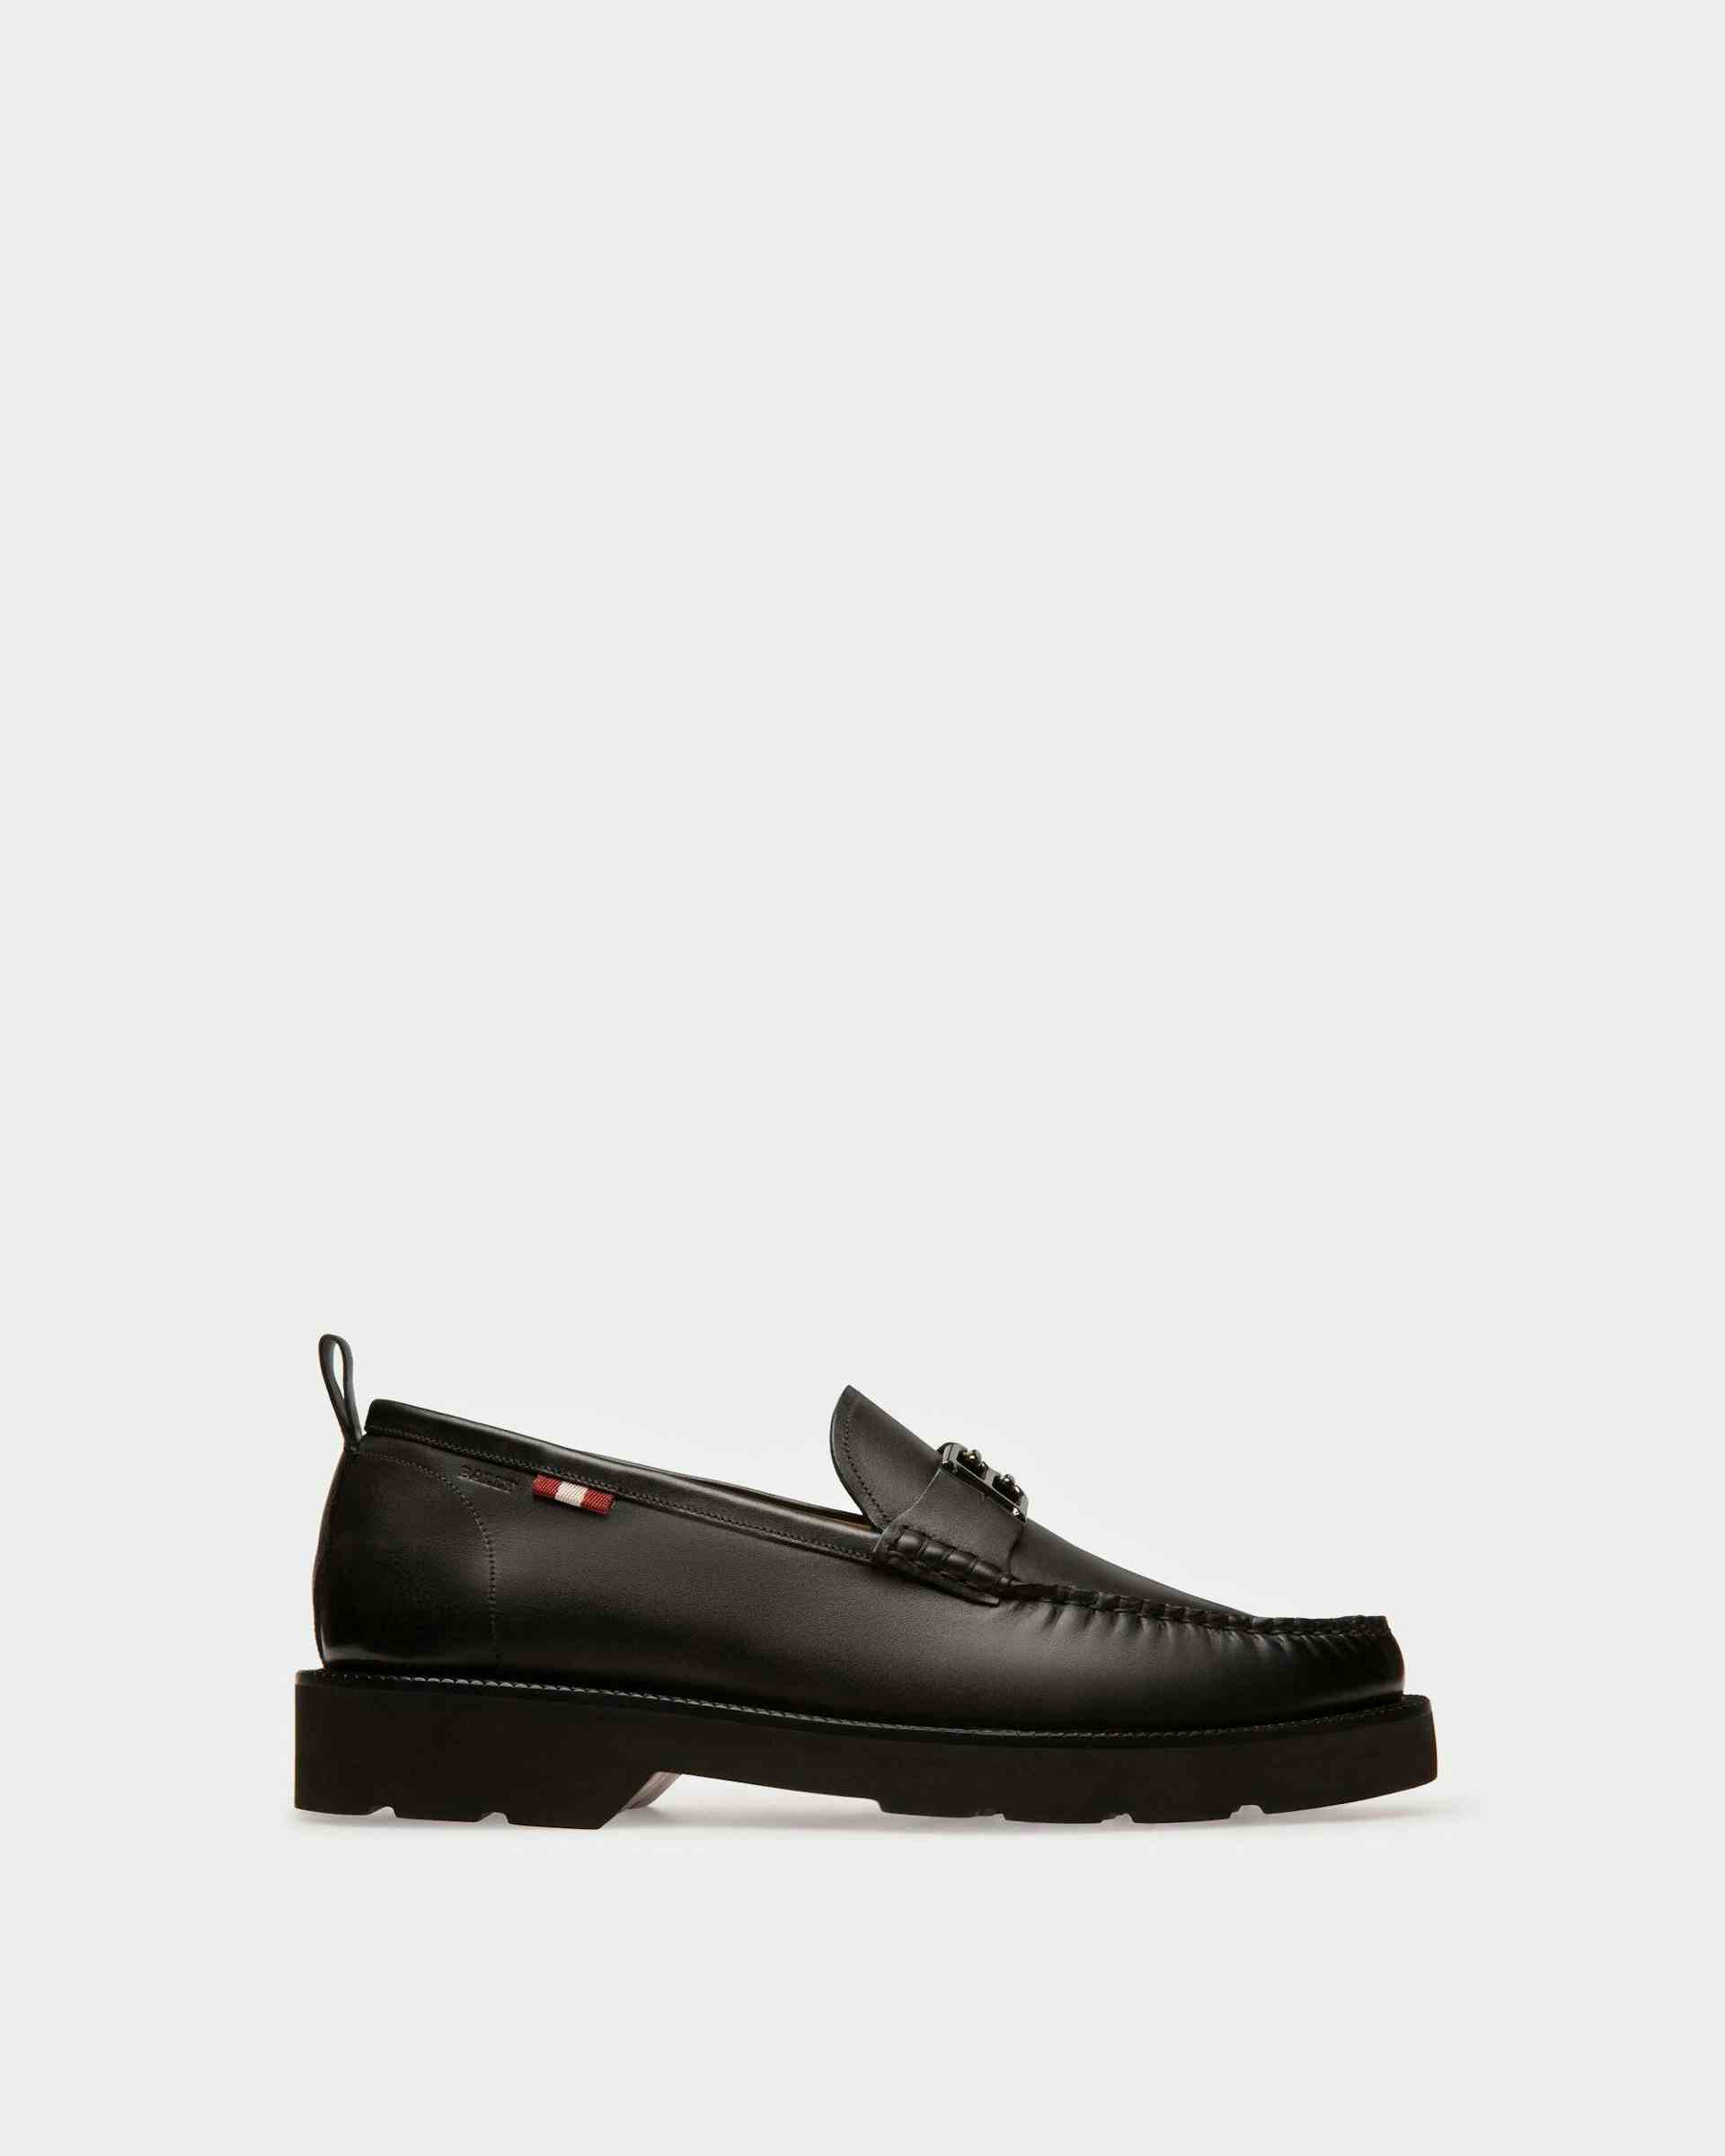 Nolam Leather Moccassins In Black - Men's - Bally